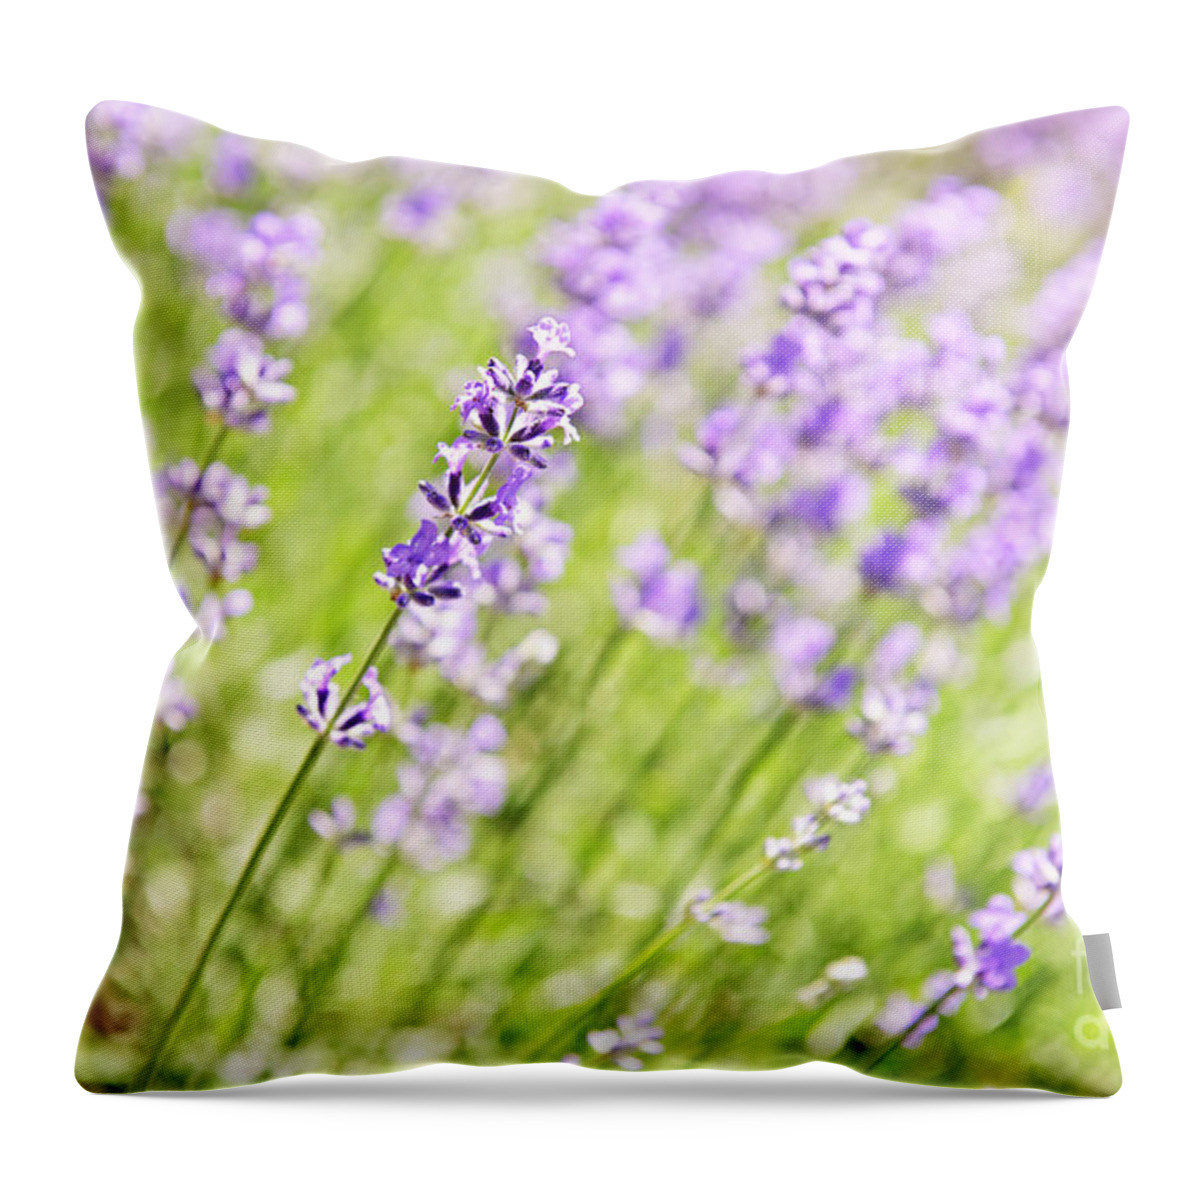 Lavender Throw Pillow featuring the photograph Glowing lavender by Elena Elisseeva